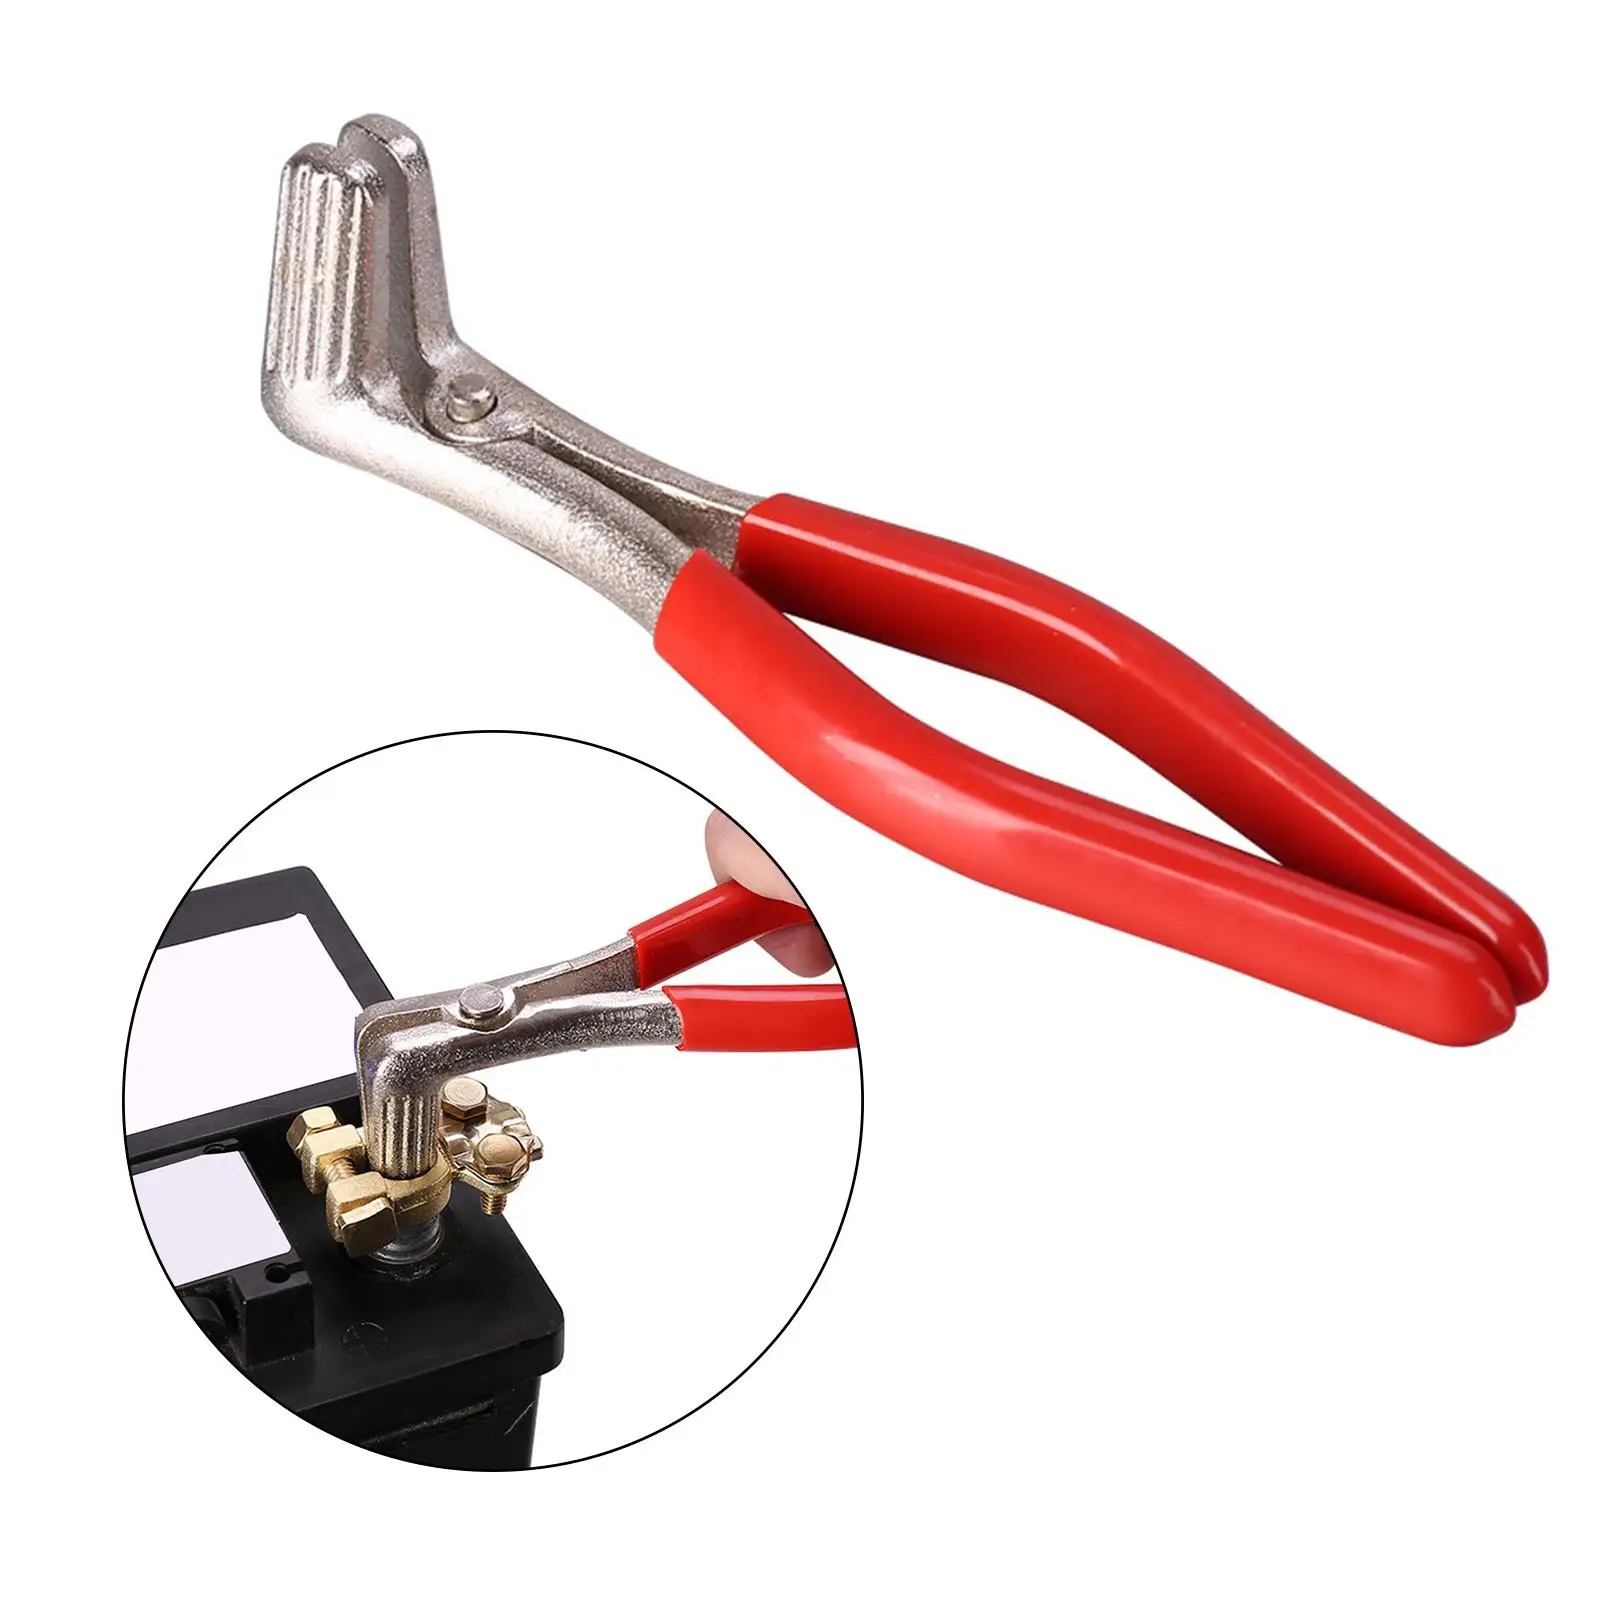 Car Battery Terminal Pliers Angled Head Multipurpose Portable Spreader Pliers Professional for Truck UTV Boat Accs